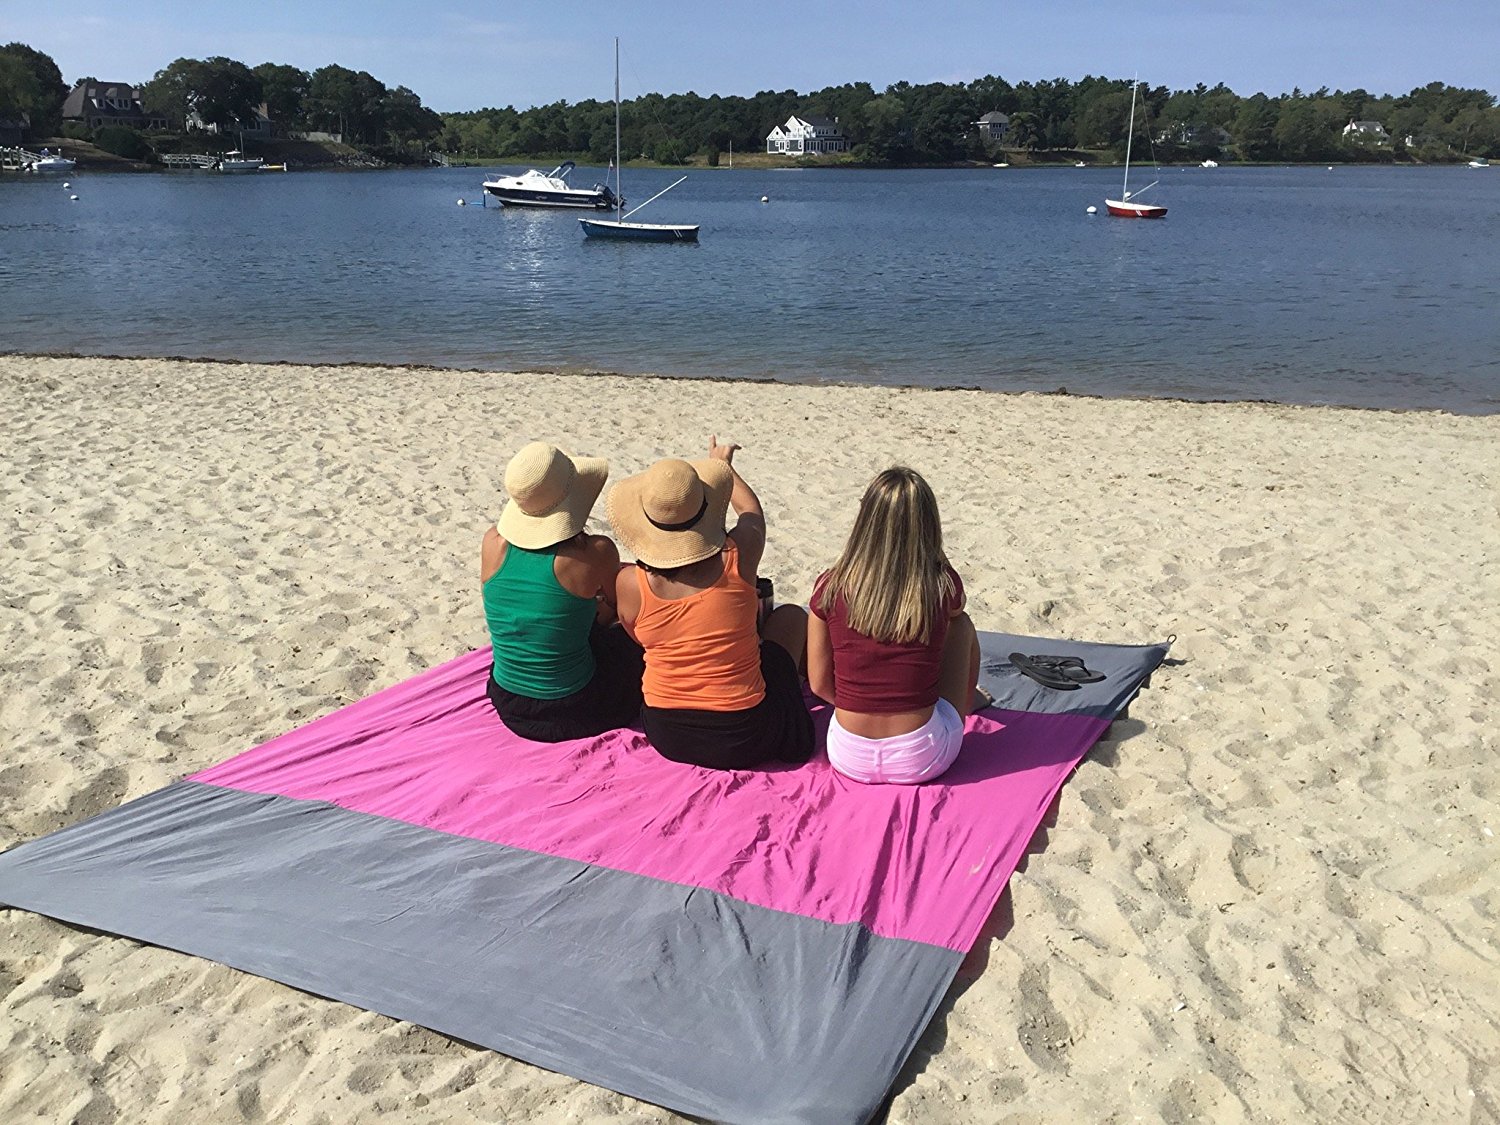 Sand Free Beach Blanket Sand Proof Extra Large Oversized 10X9 XXL for 7 Adults and Compact Outdoor Pocket Blanket large Sand Proof Picnic Mat for Beach Parks Picnics and Hiking Green+Orange+Grey